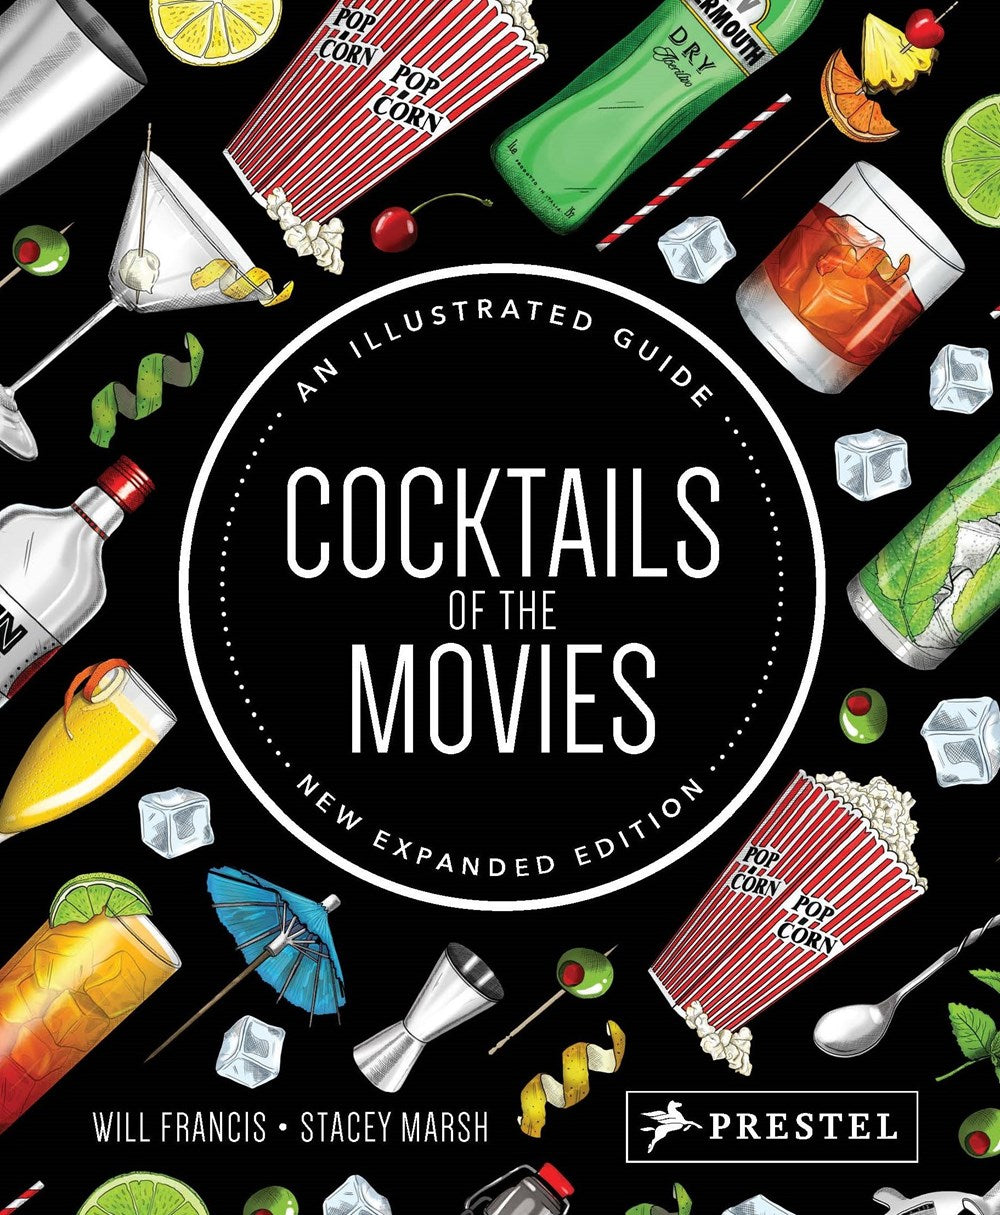 Cocktails of the Movies: An Illustrated Guide to Cinematic Mixology New Expanded Edition